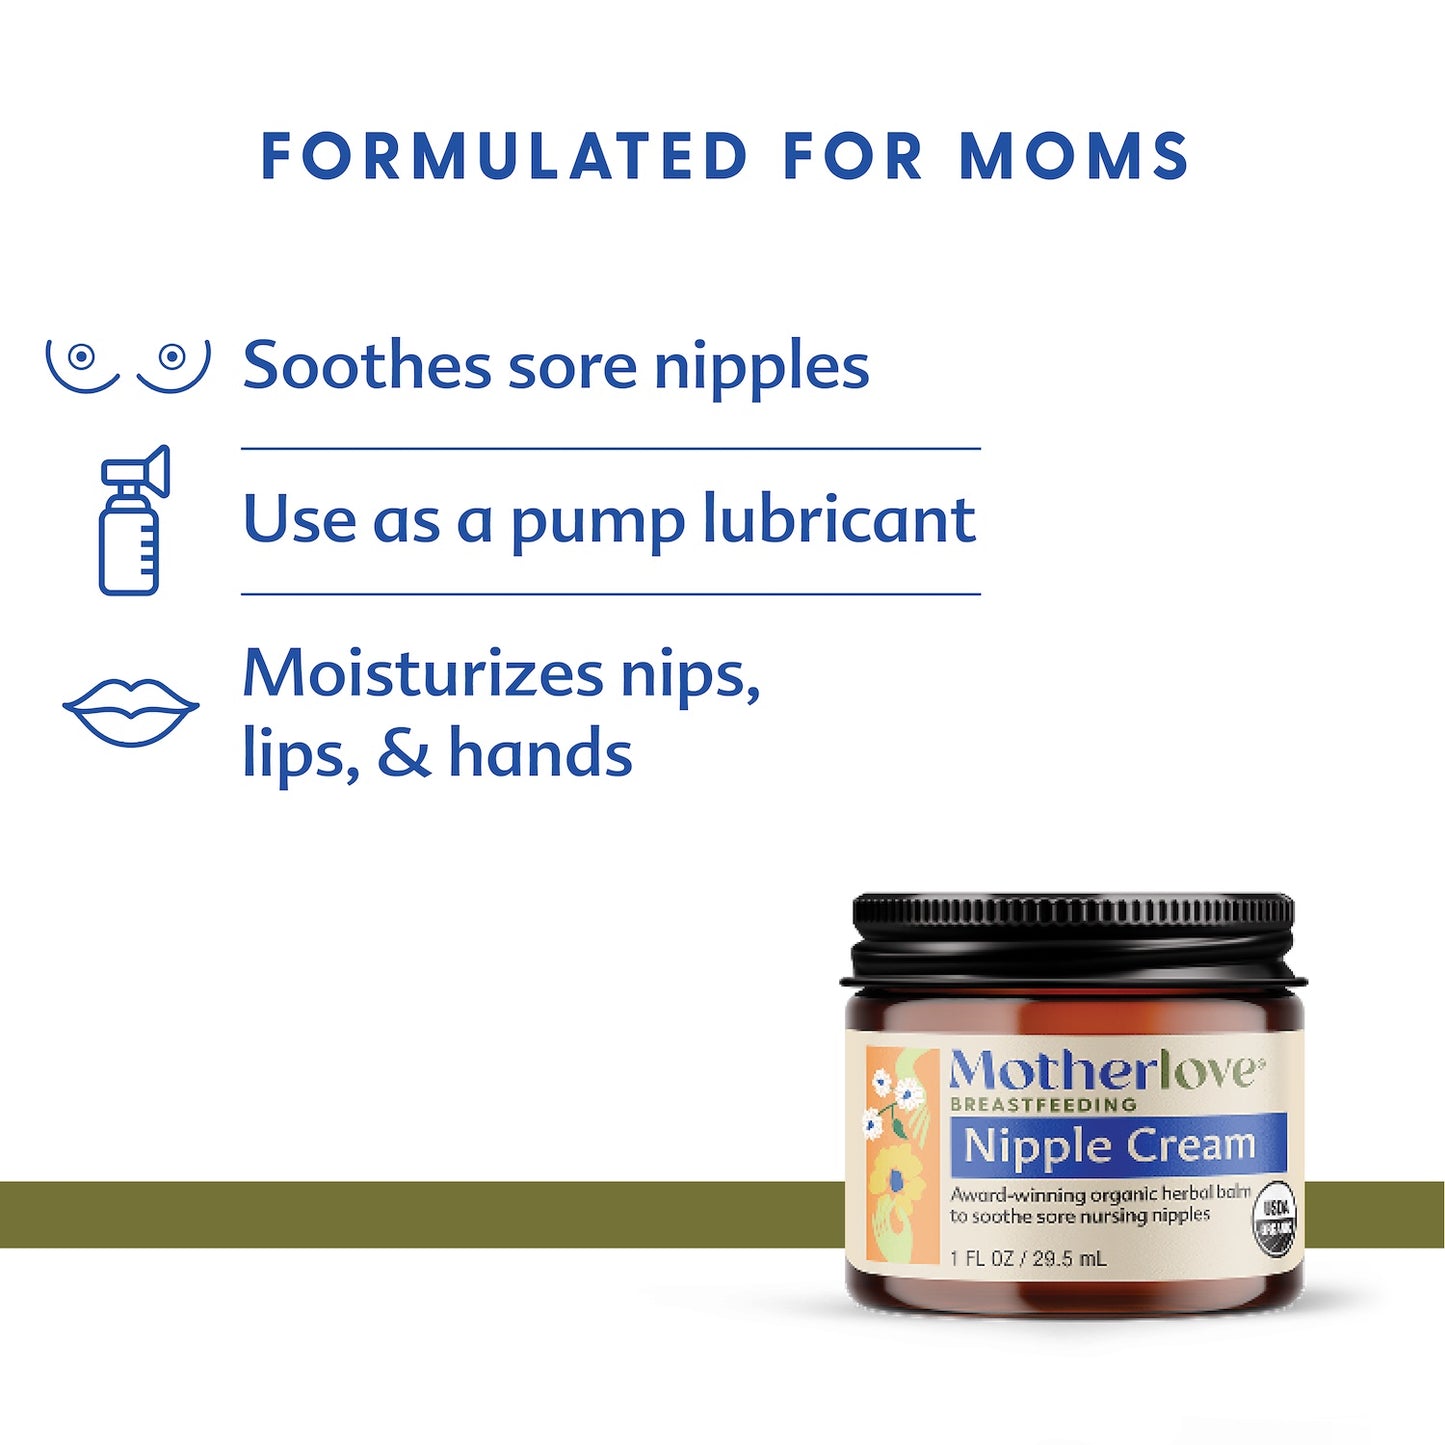 description of why the nipple cream is formulated for moms, soothes sore nipples, use as a pump lubricant, moisturizes nips, lips, & hands